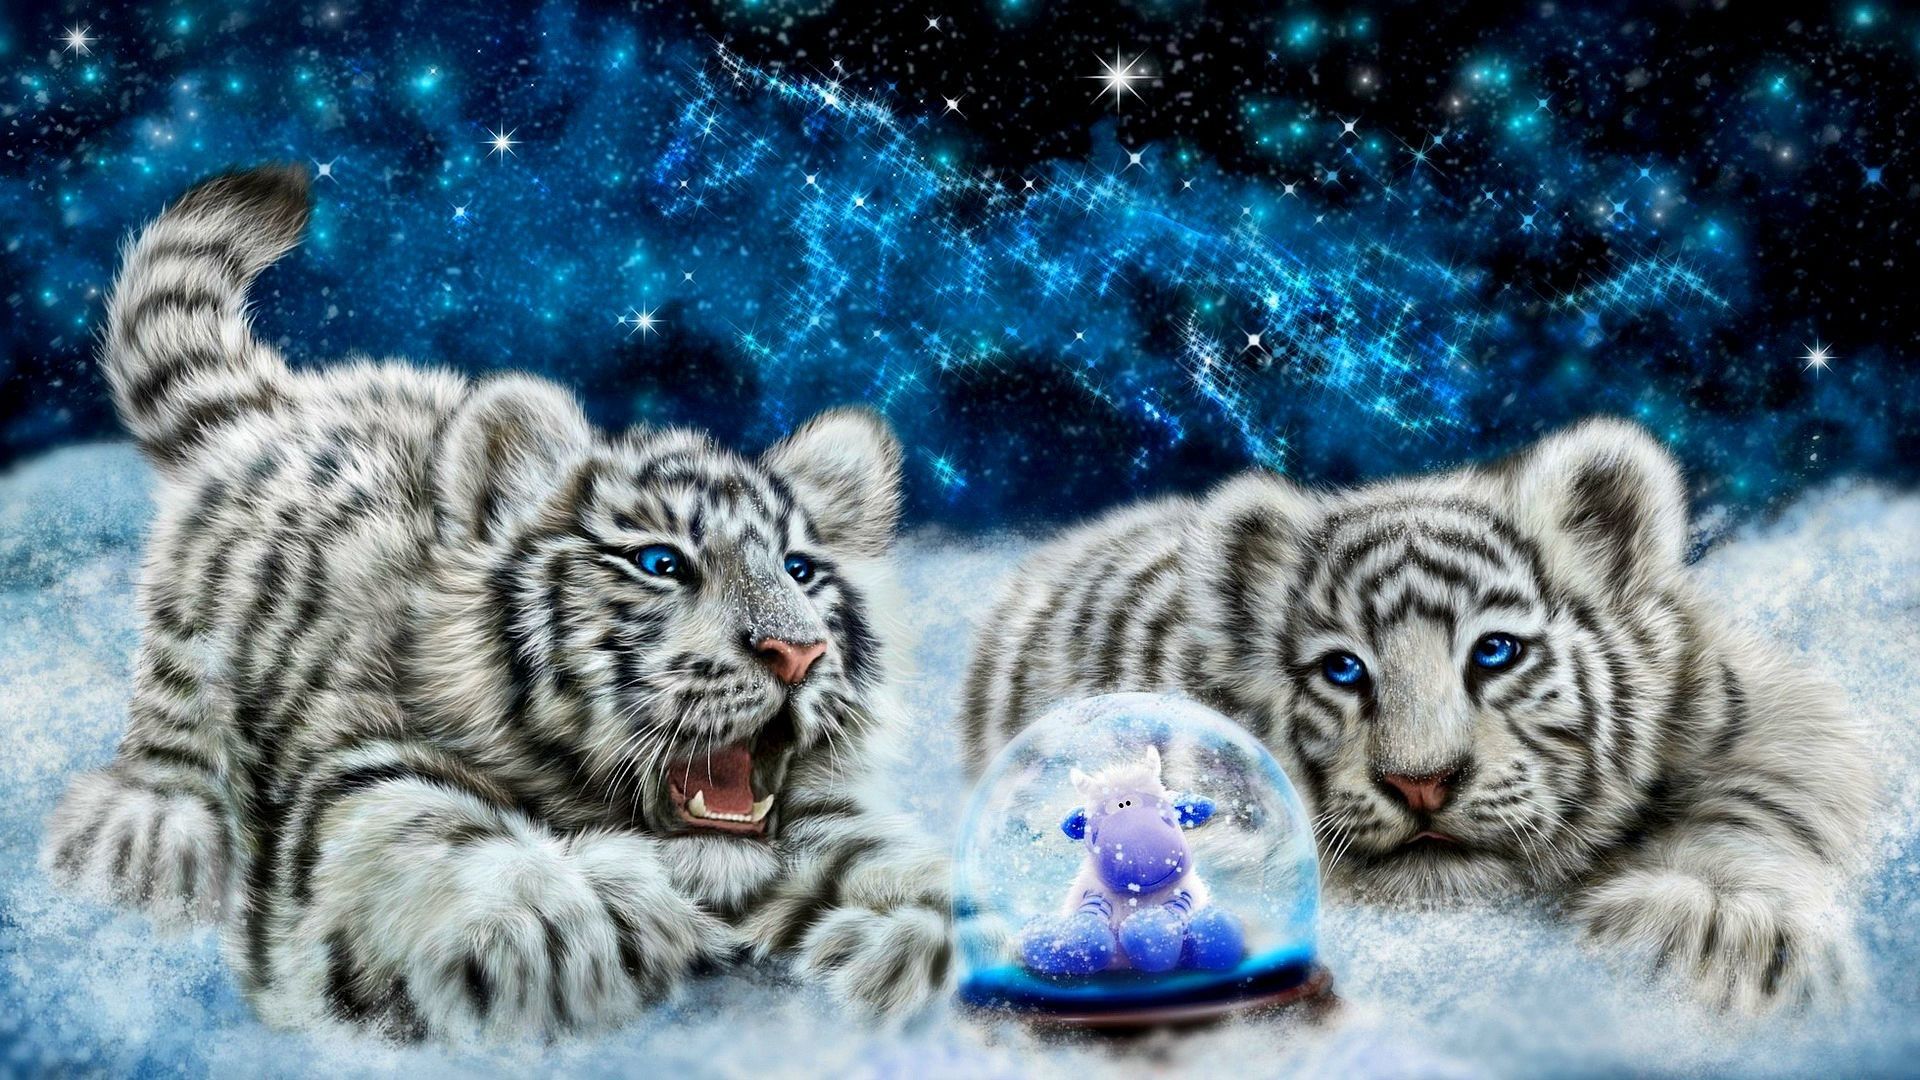 Tiger and Snow Winter Background HD